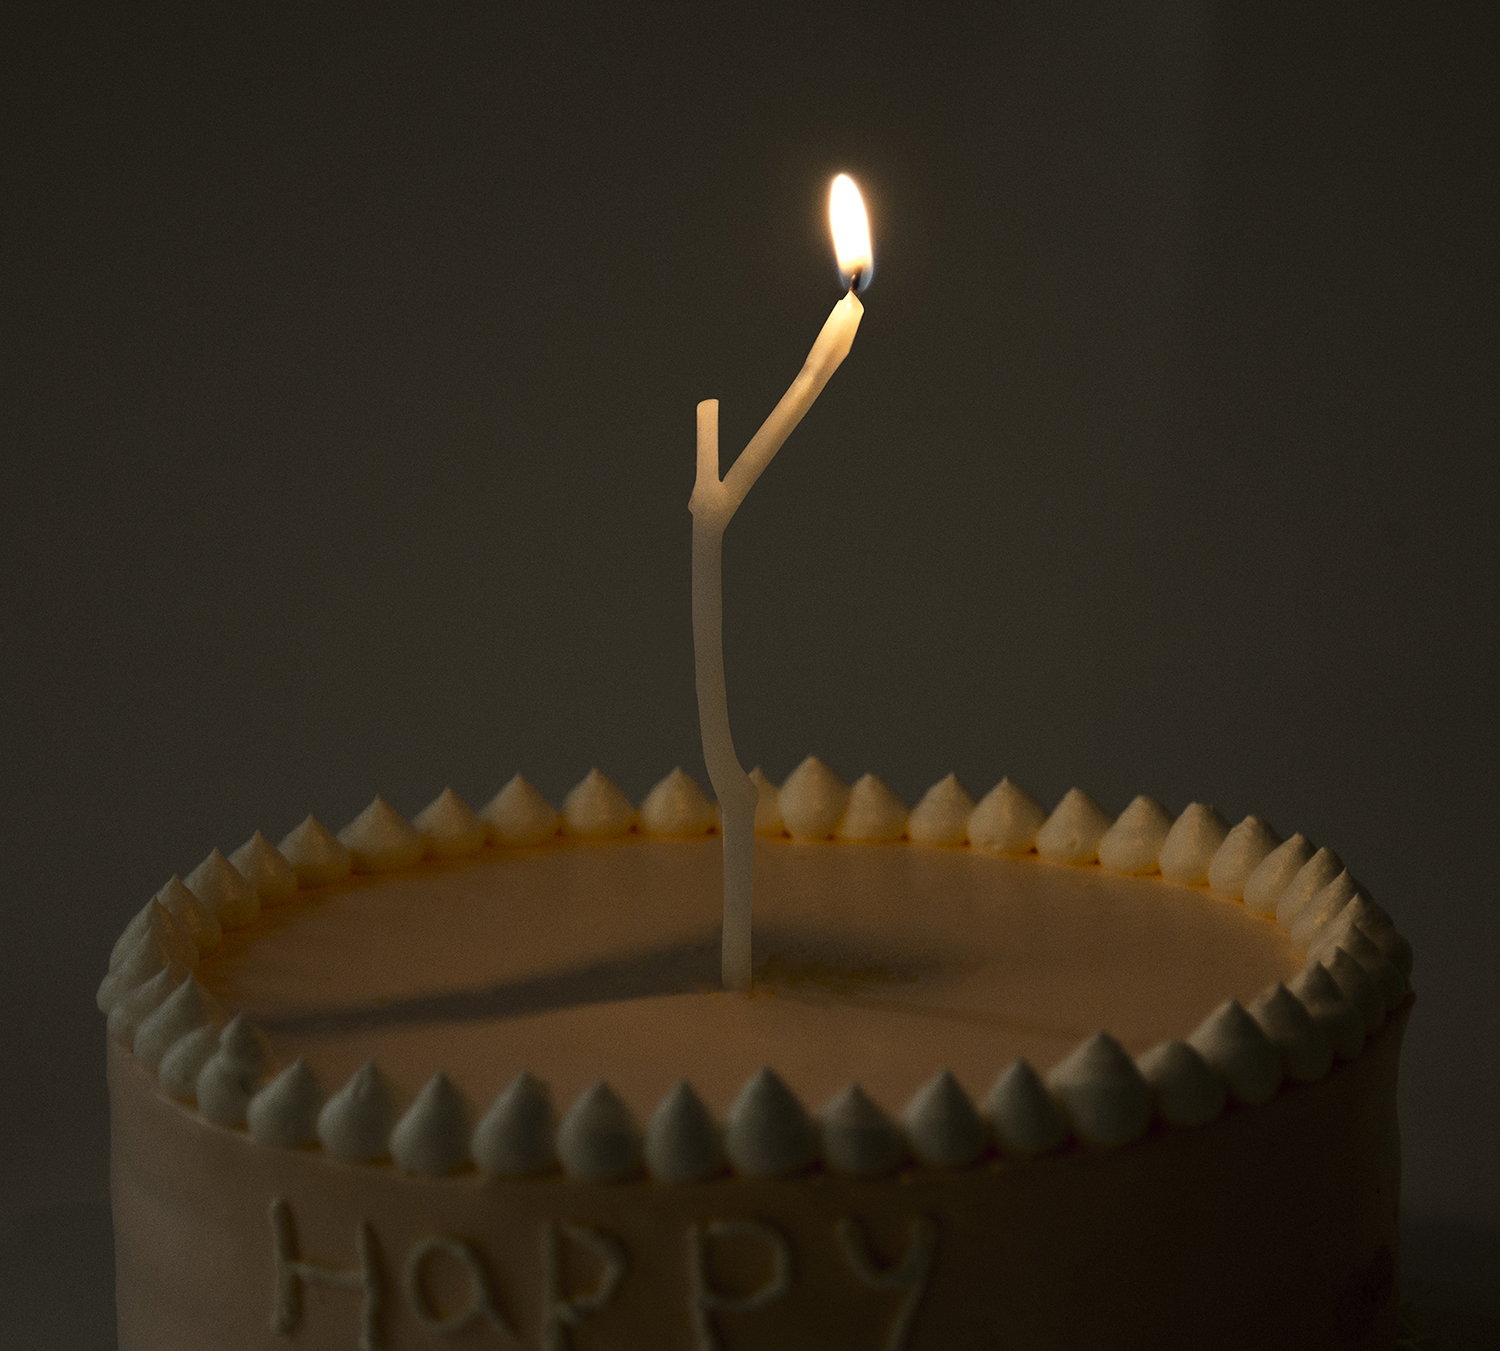 Wish in the Wind Birthday Candle by Ling Ouyang